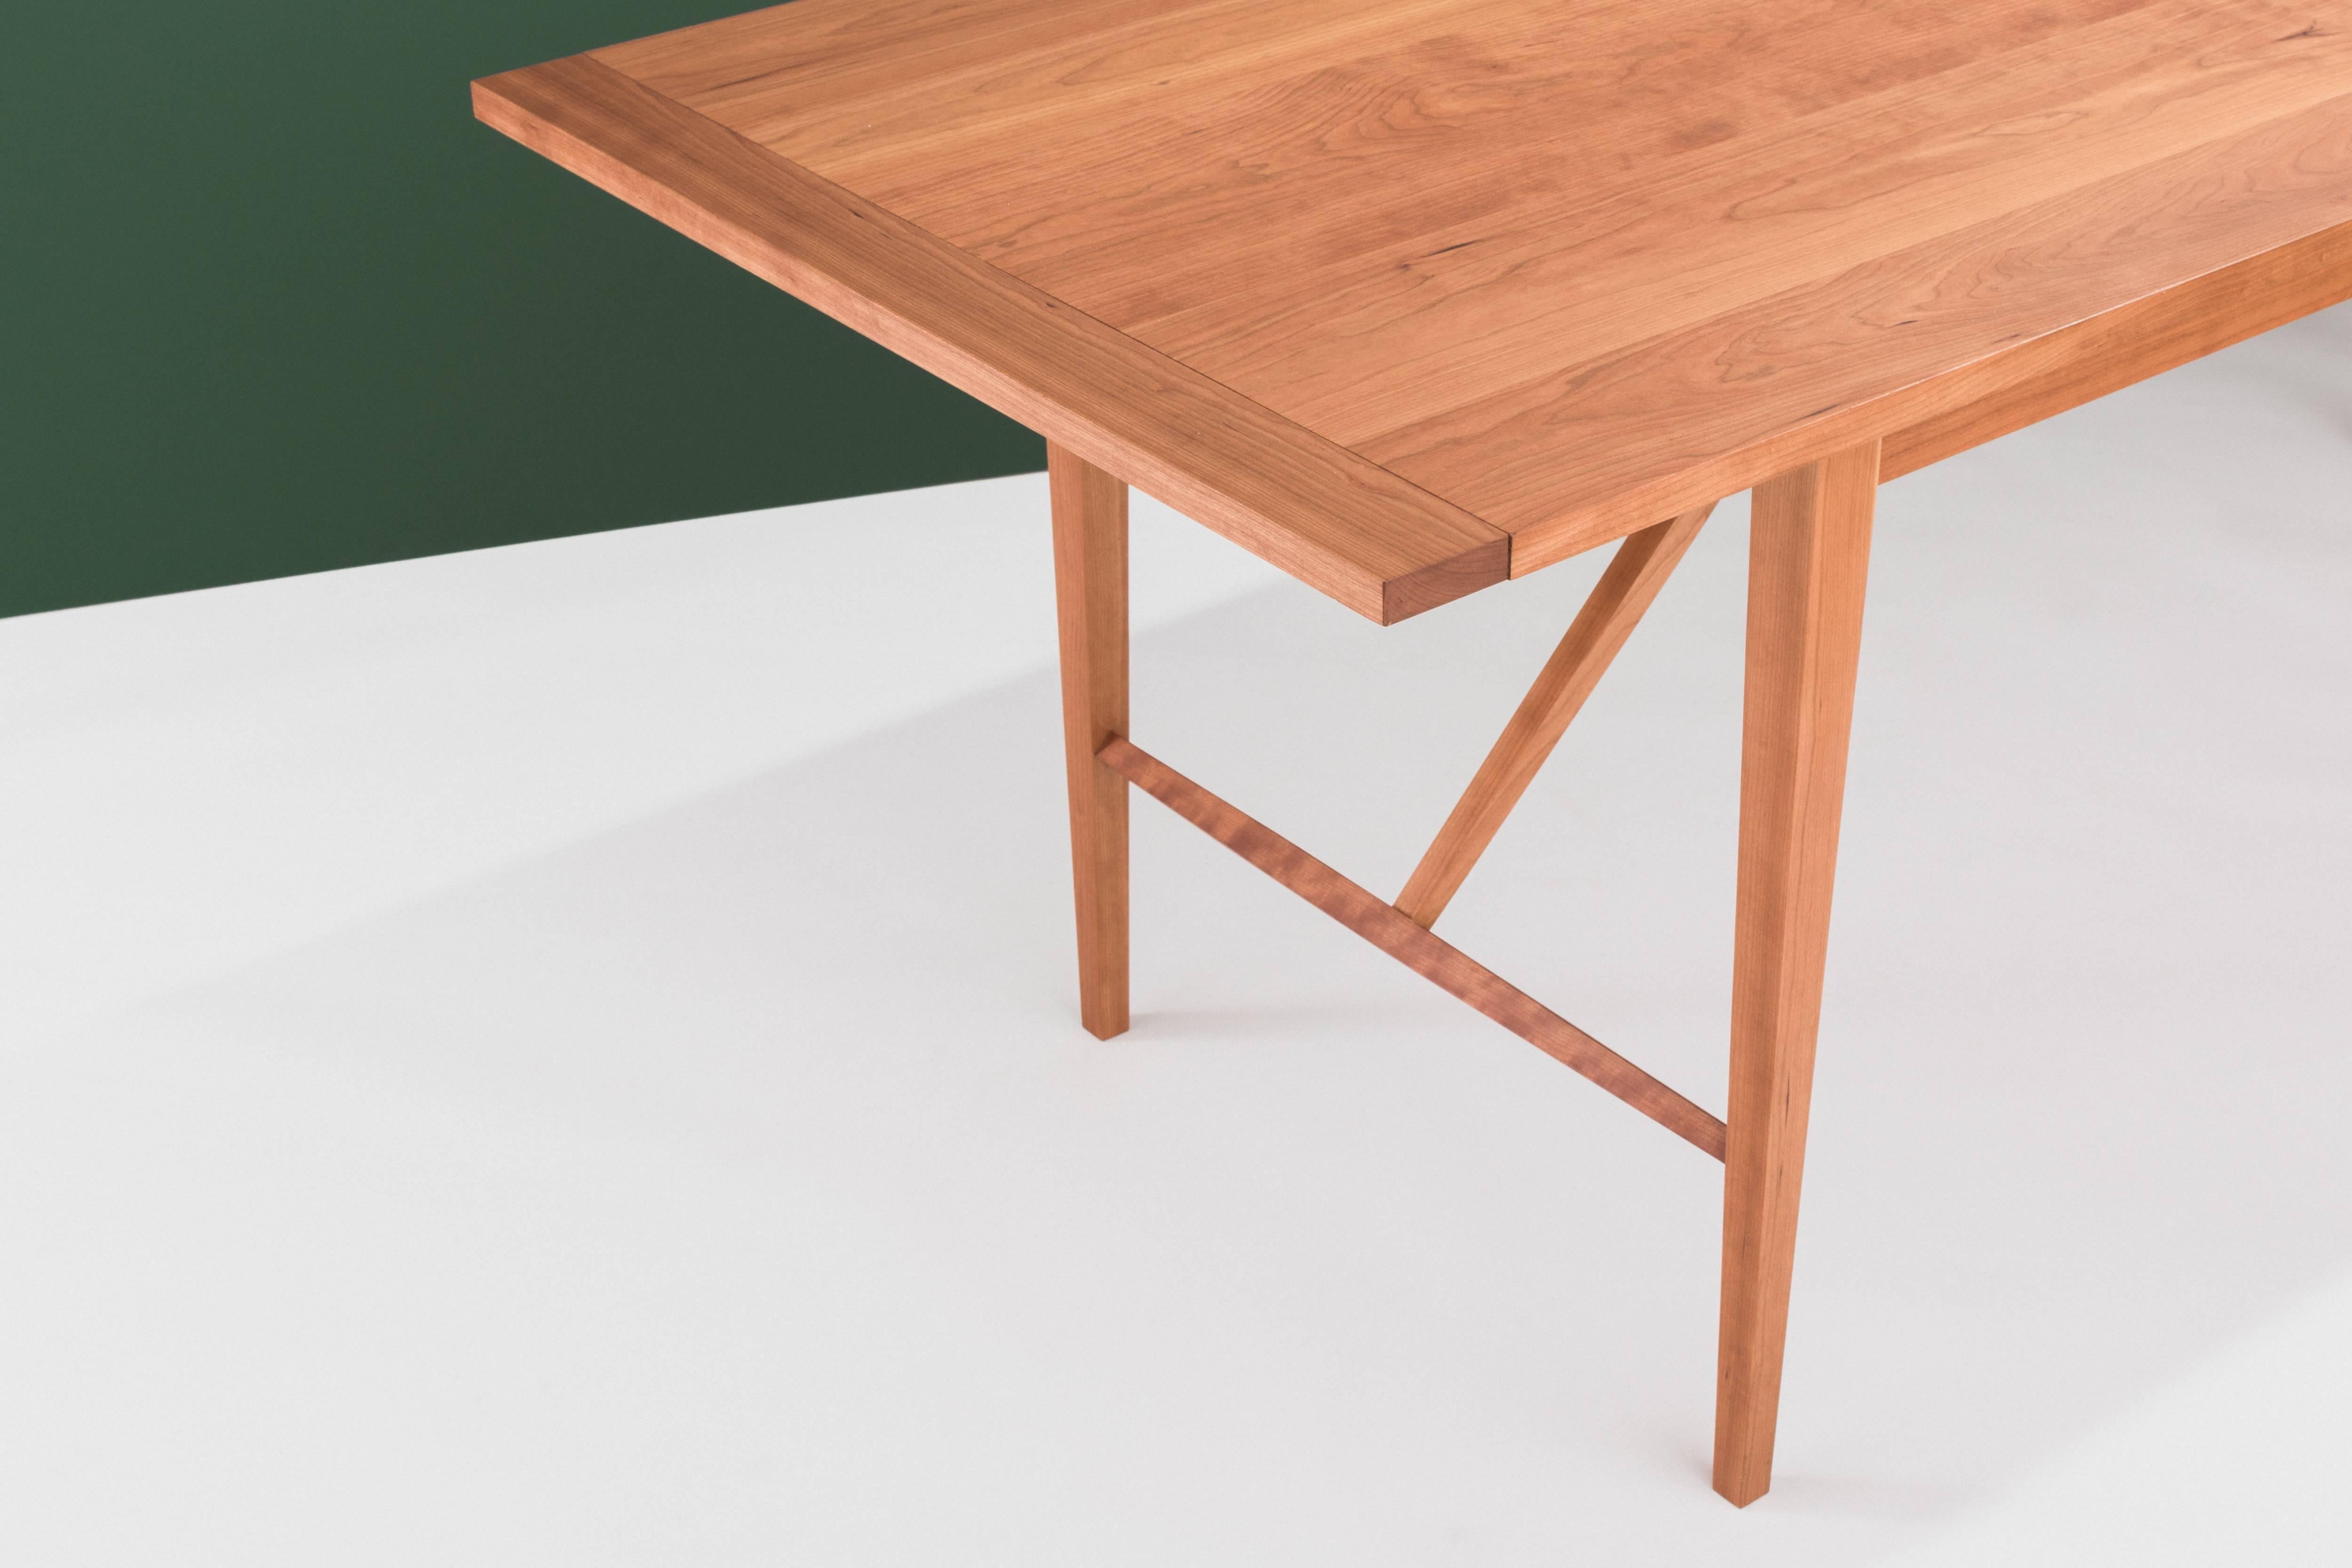 Hill Dining Table by Tretiak Works, Handcrafted Solid Cherry Shaker In New Condition For Sale In Portland, OR